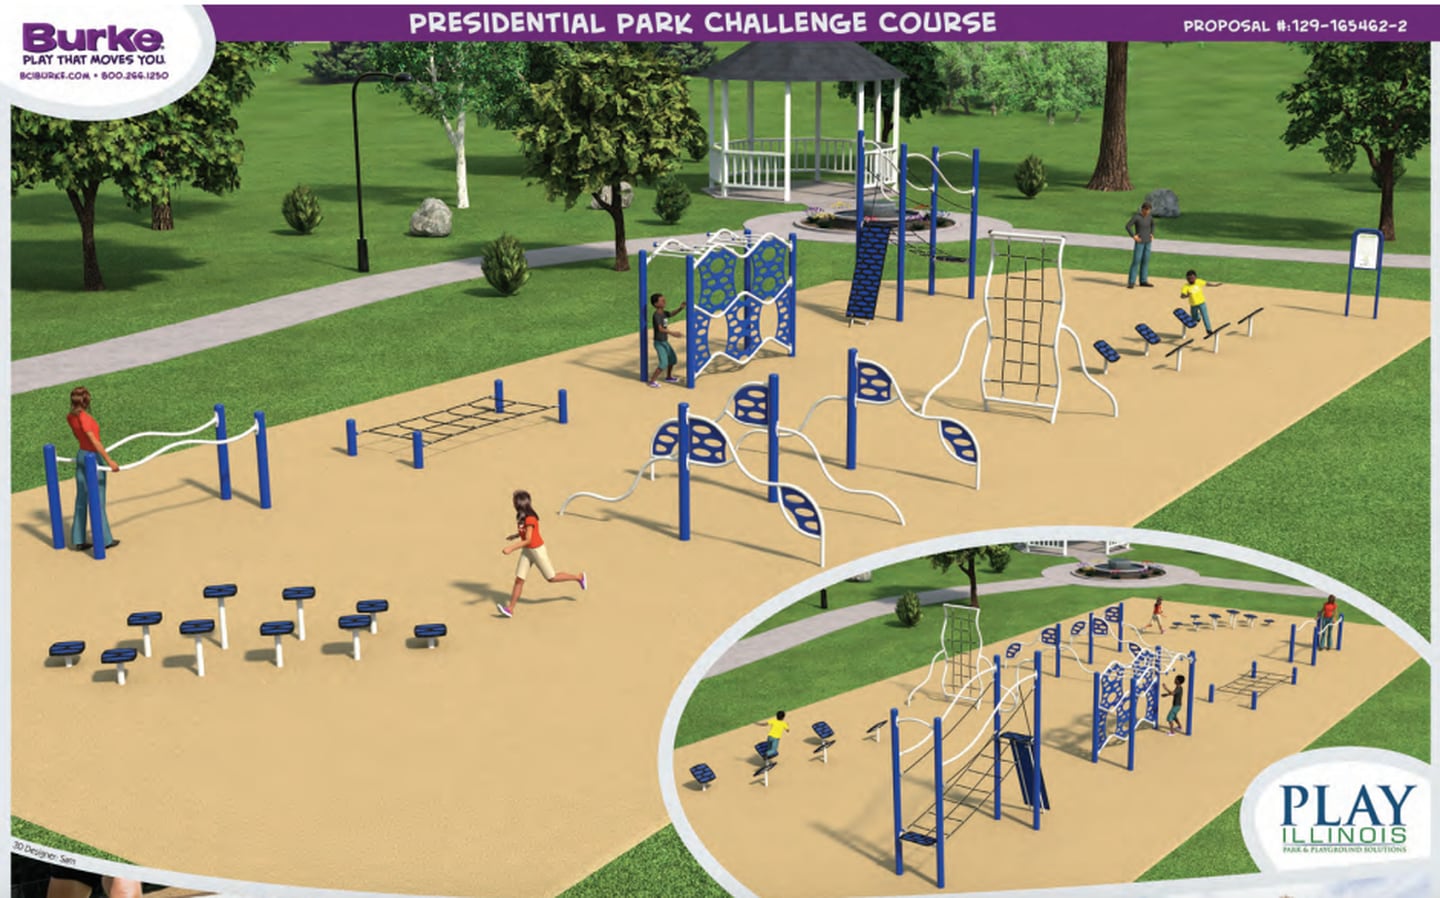 A rendering of the challenge course for Algonquin's Presidential Park.